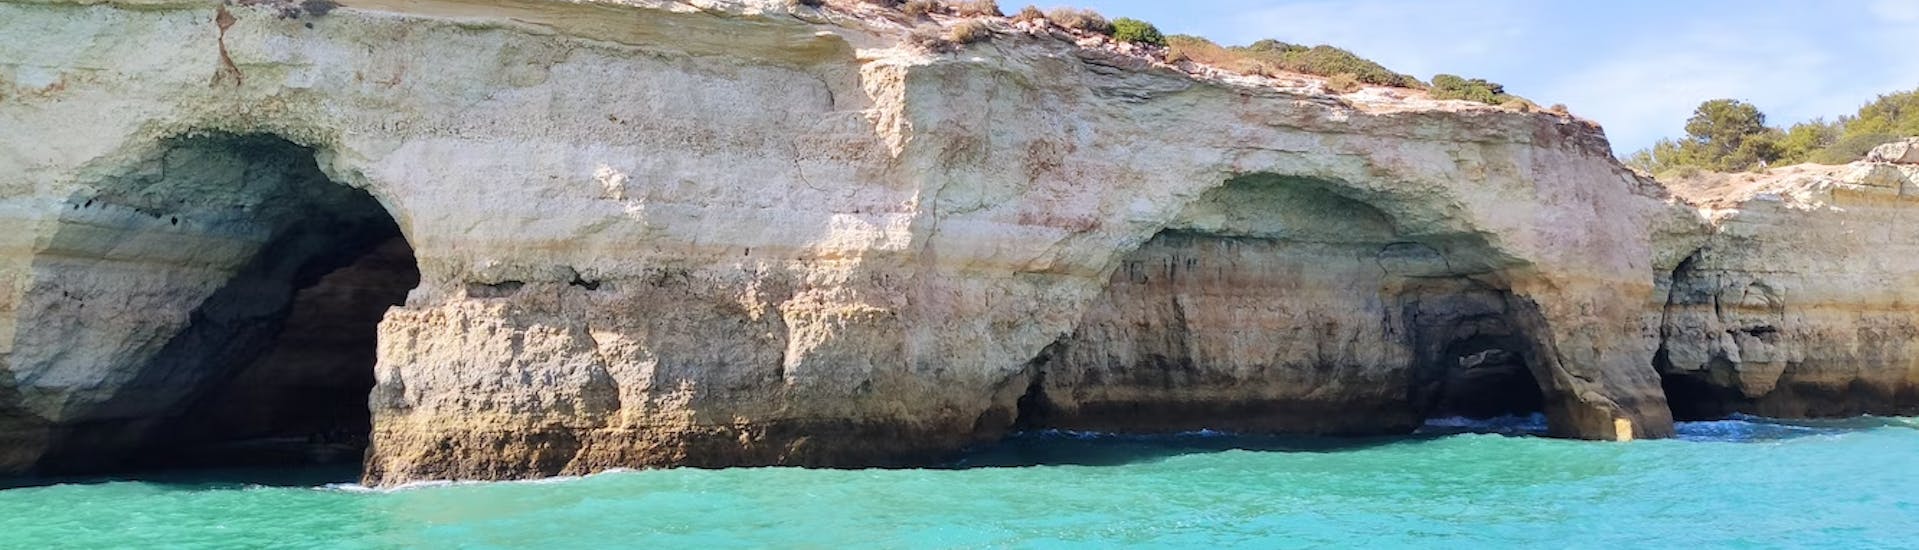 Picture of the breathtaking Algar de Benagil Cave taken from the ocean, during the private RIB boat trip from Lagos to the Benagil Caves with Zawaia Experience.